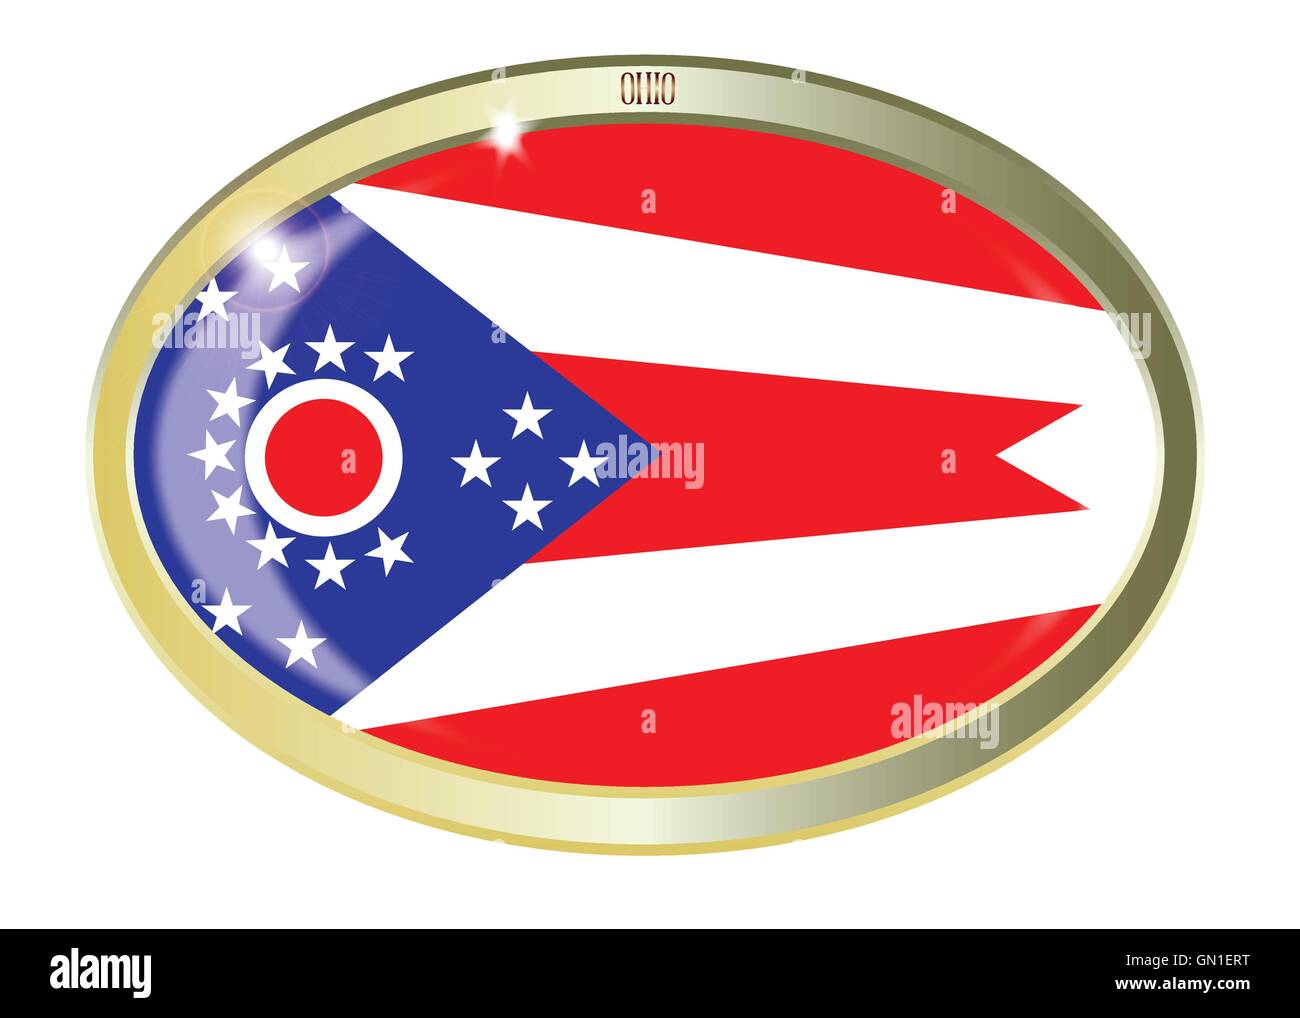 Ohio State Flag Oval Button Stock Vector